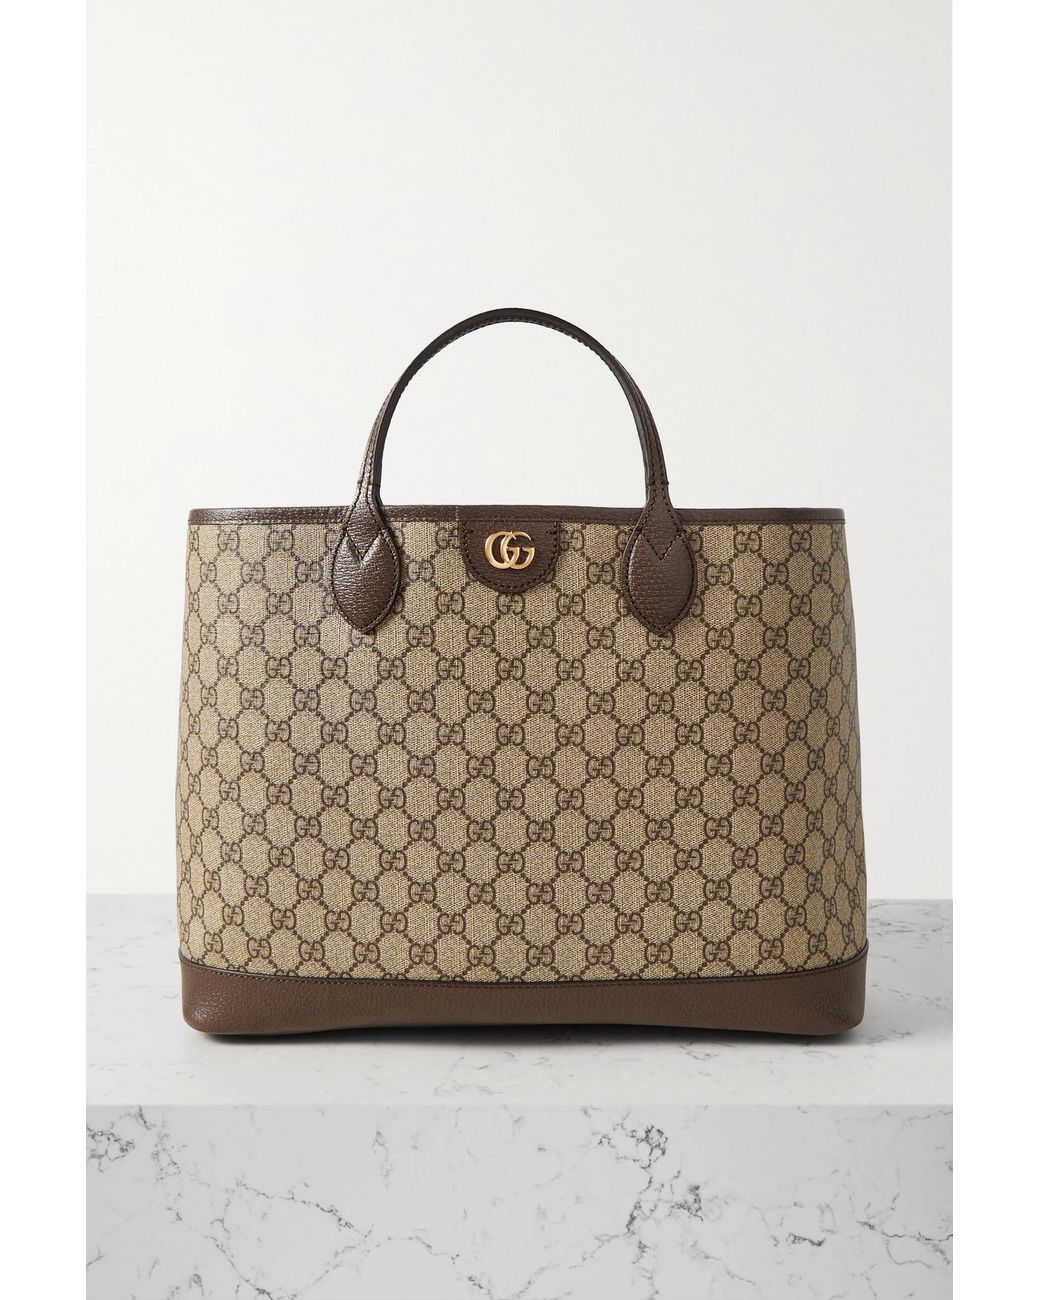 Gucci - Ophidia Textured Leather-trimmed Printed Coated-Canvas Shoulder Bag - Neutrals - One Size - Net A Porter